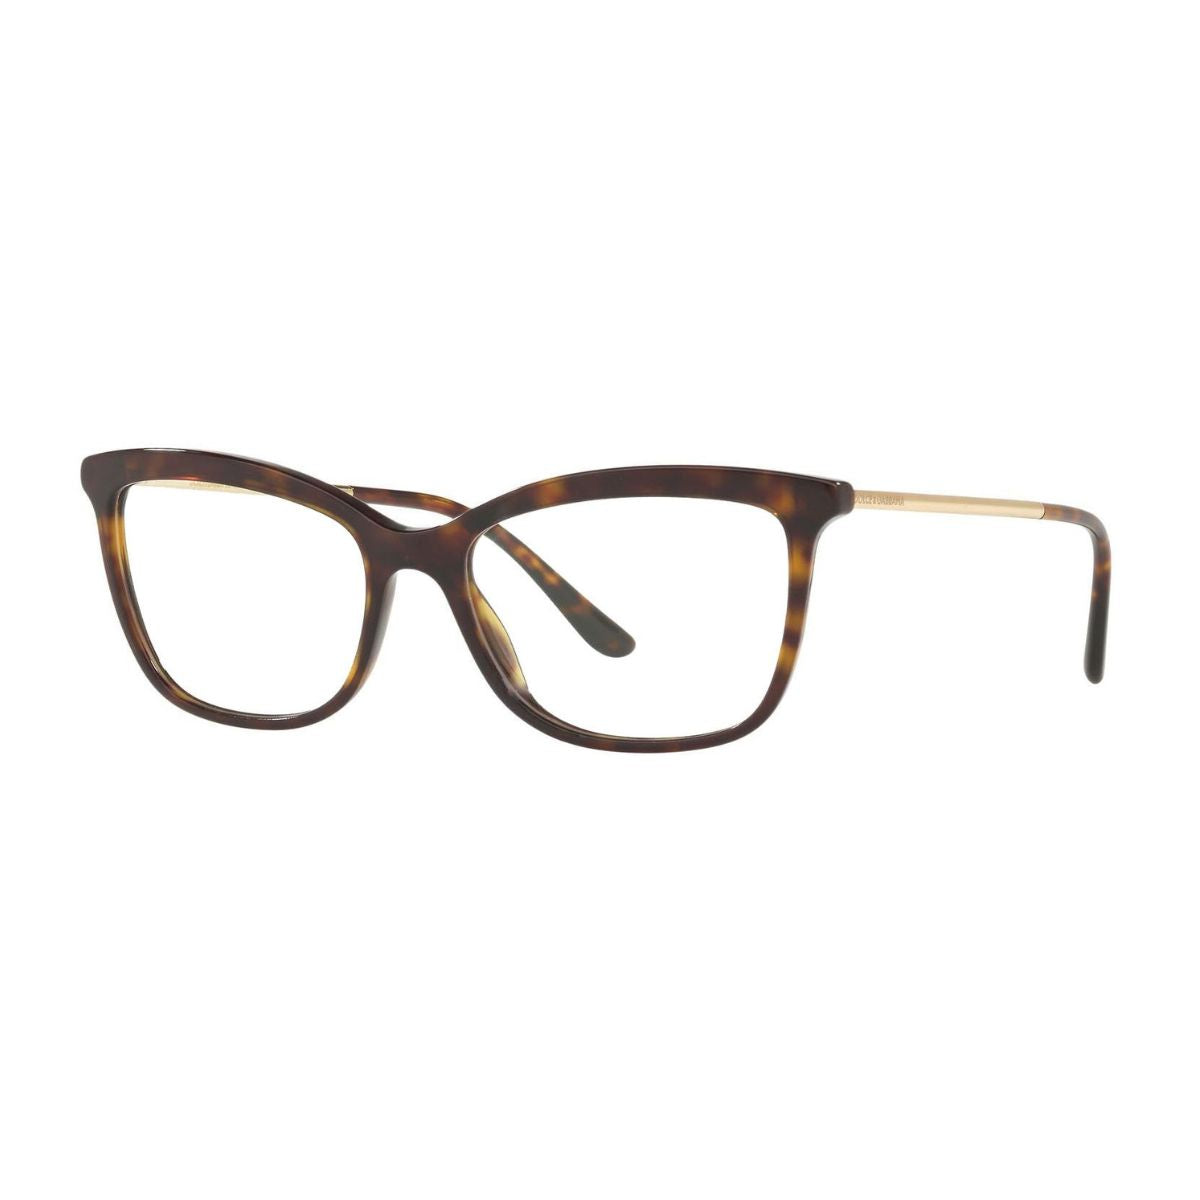 "Dolce&Gabbana 3286 502 spactacle frame for women's at optorim"